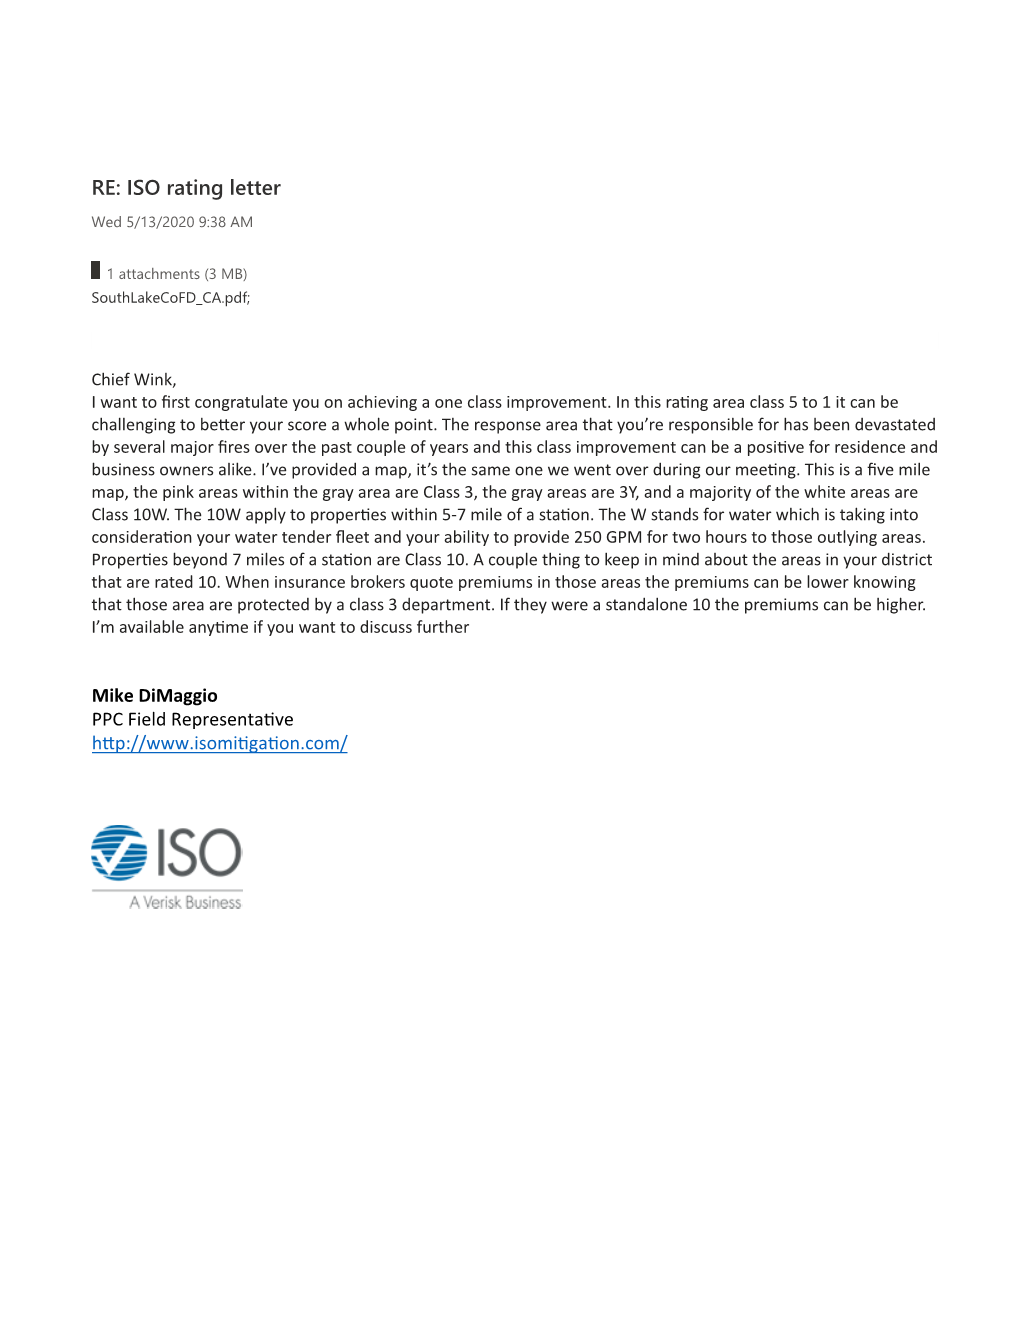 RE: ISO Rating Letter